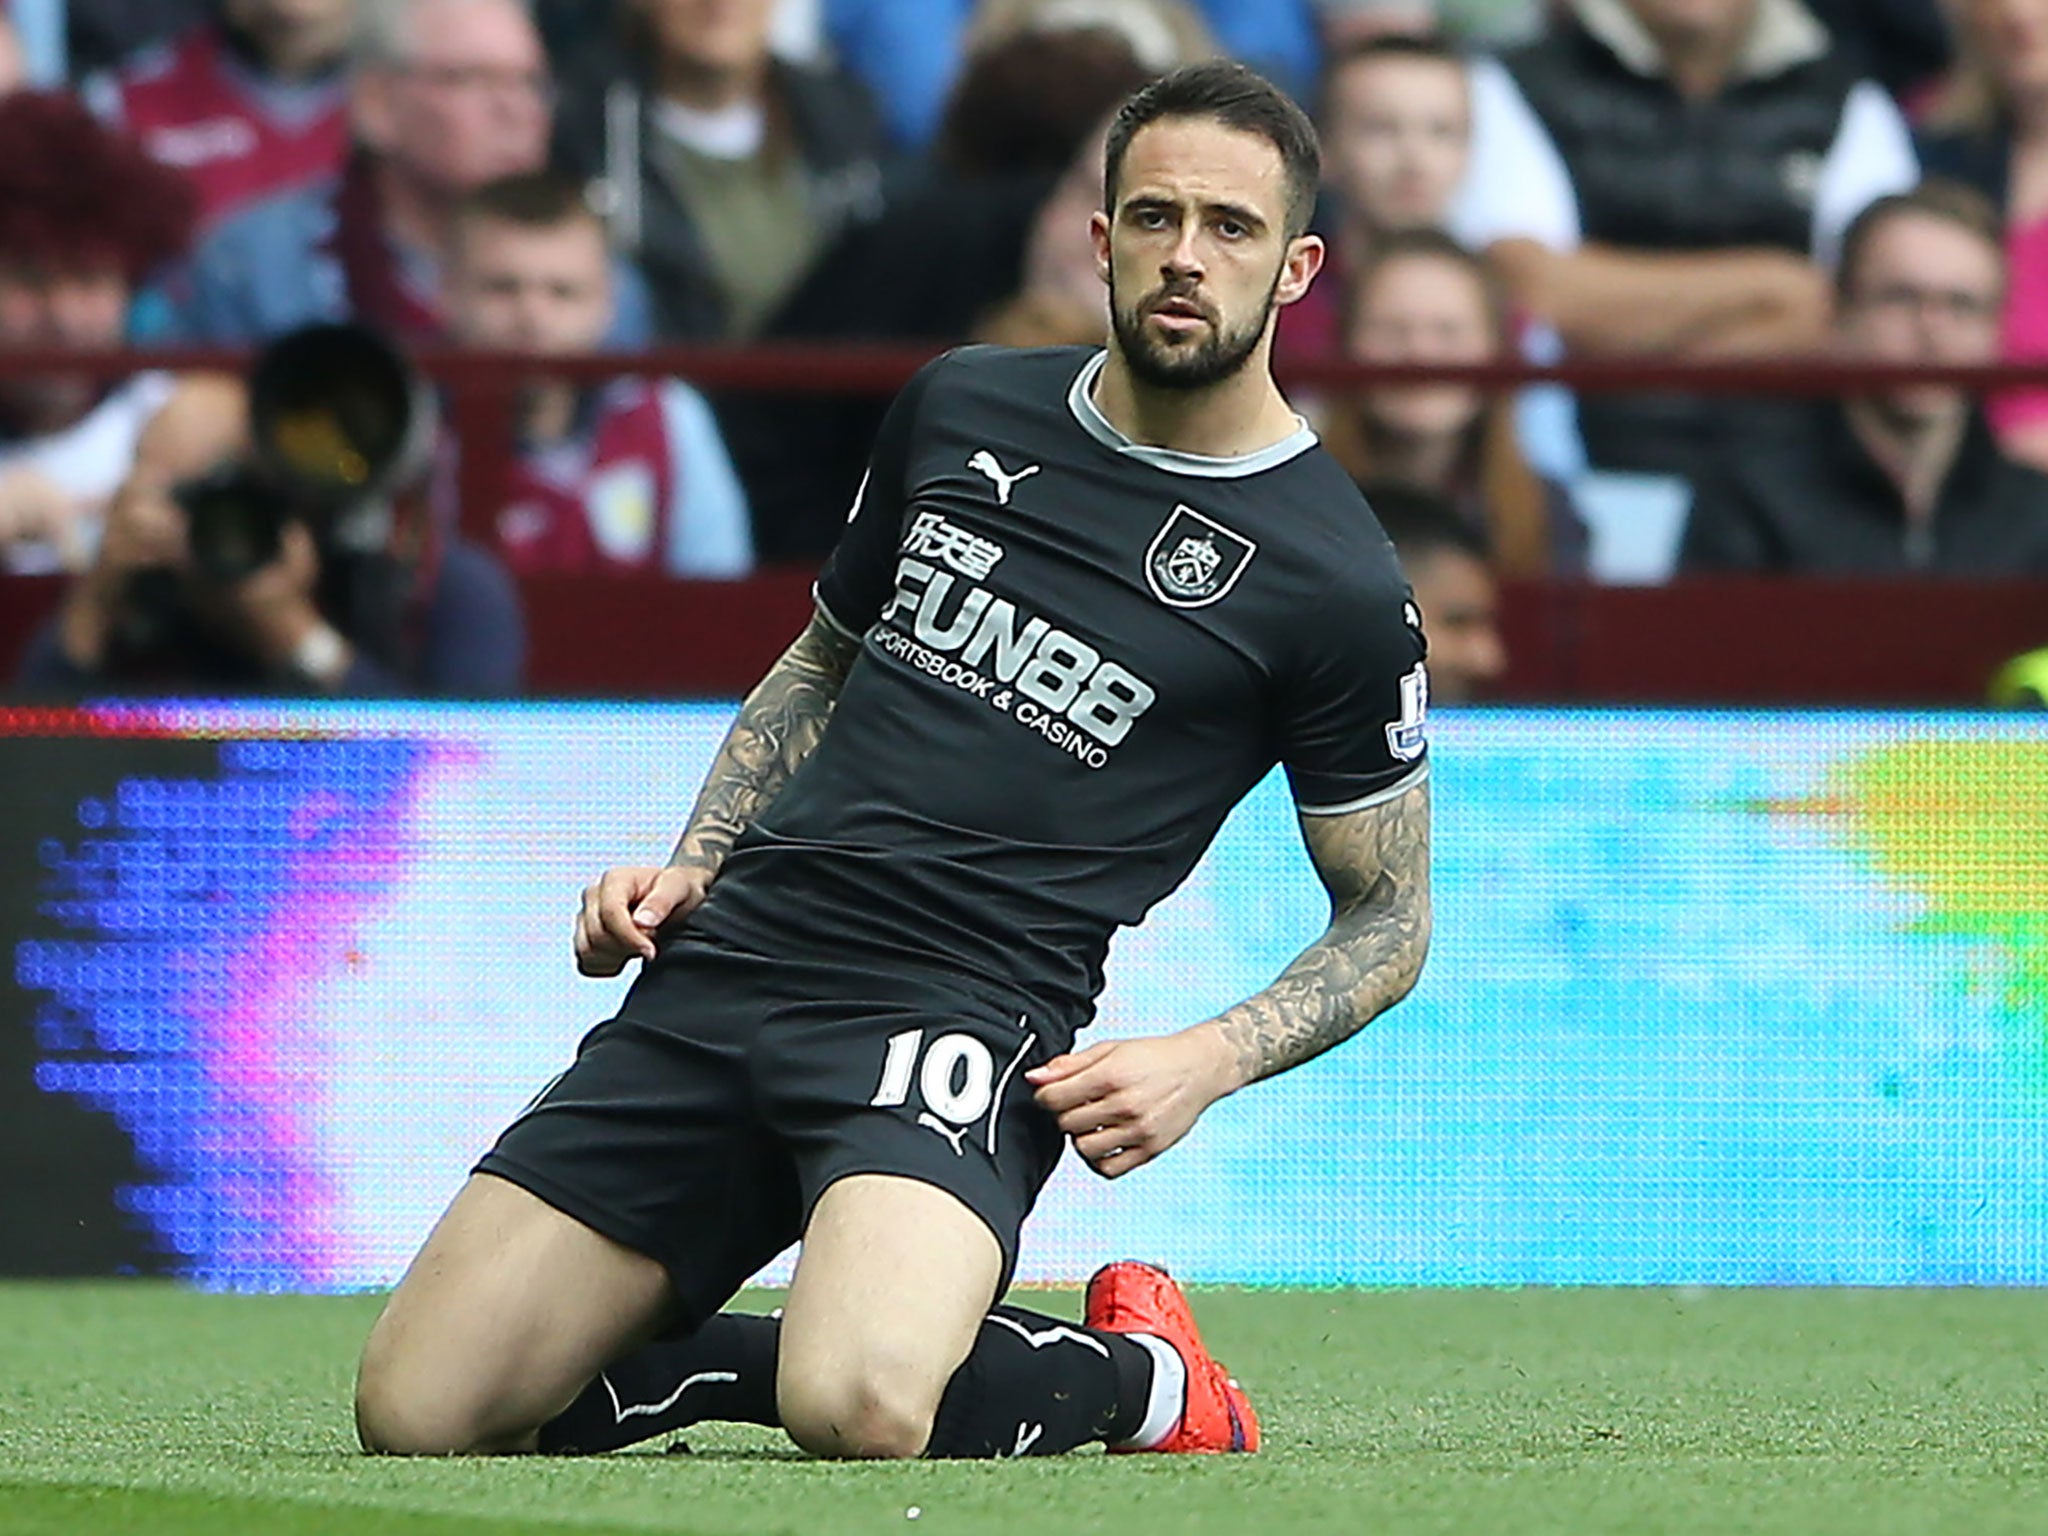 Danny Ings has given his word that he will join Liverpool when his Burnley contract expires